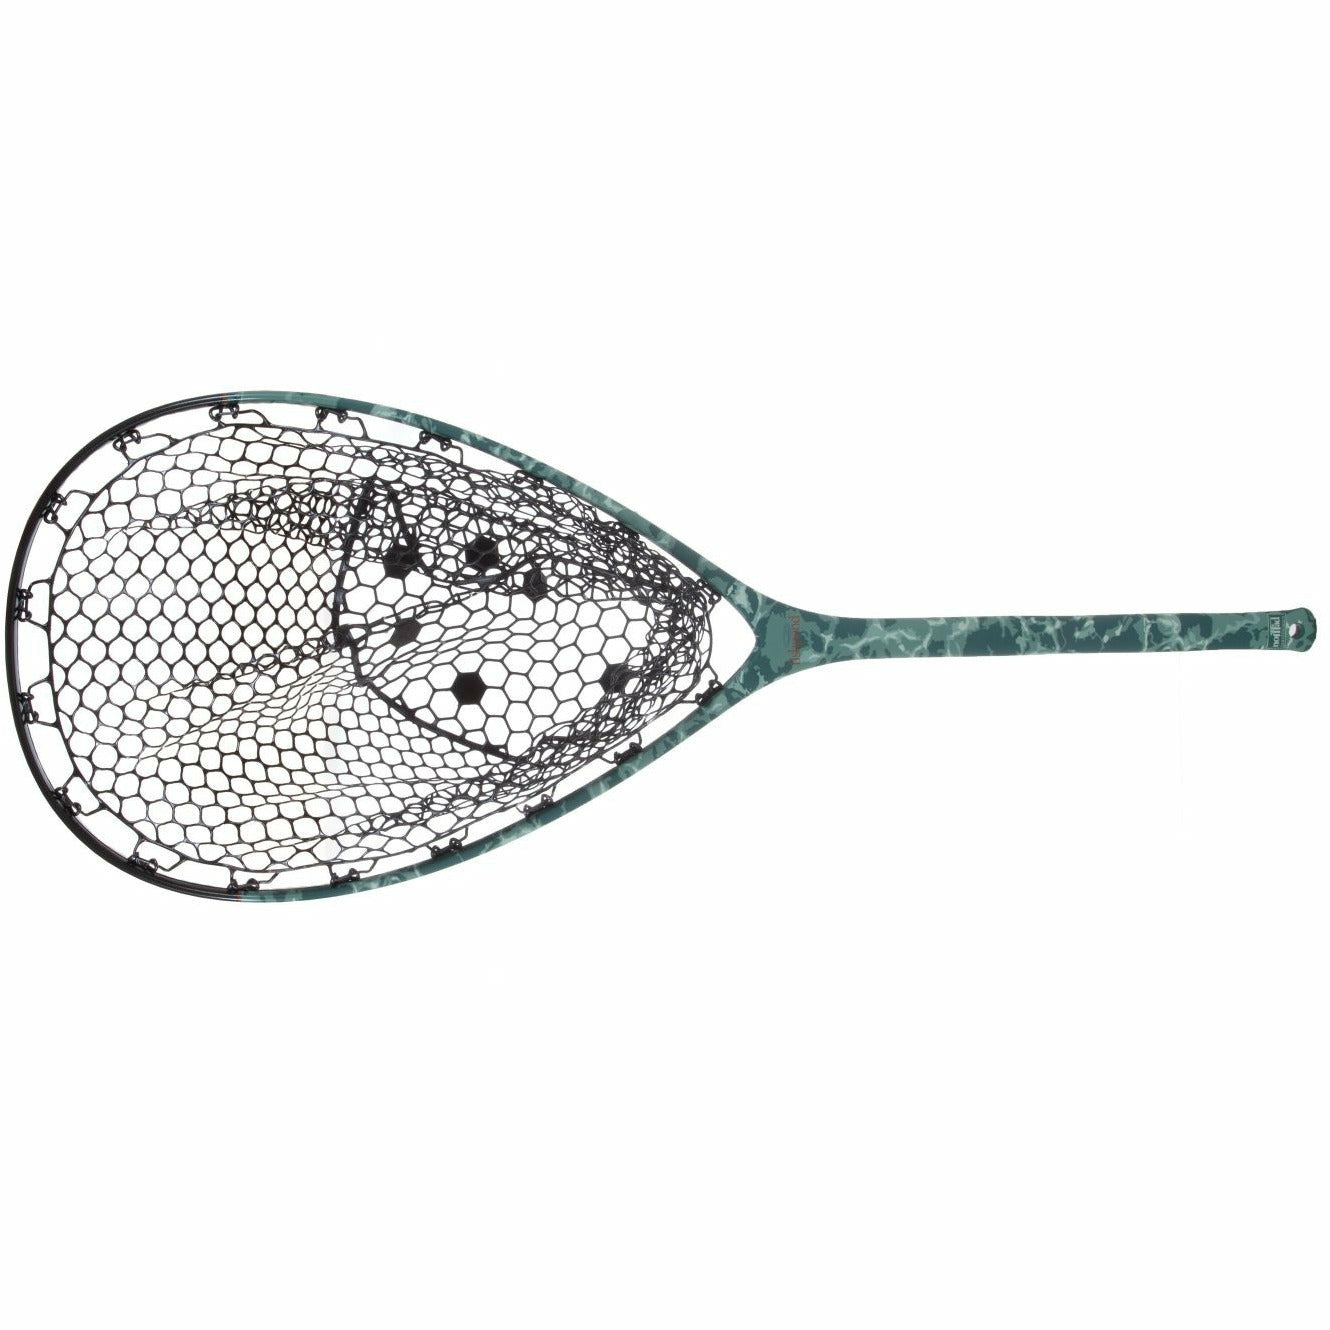 Fishpond Nomad Mid-Length Boat Net - Salty Camo